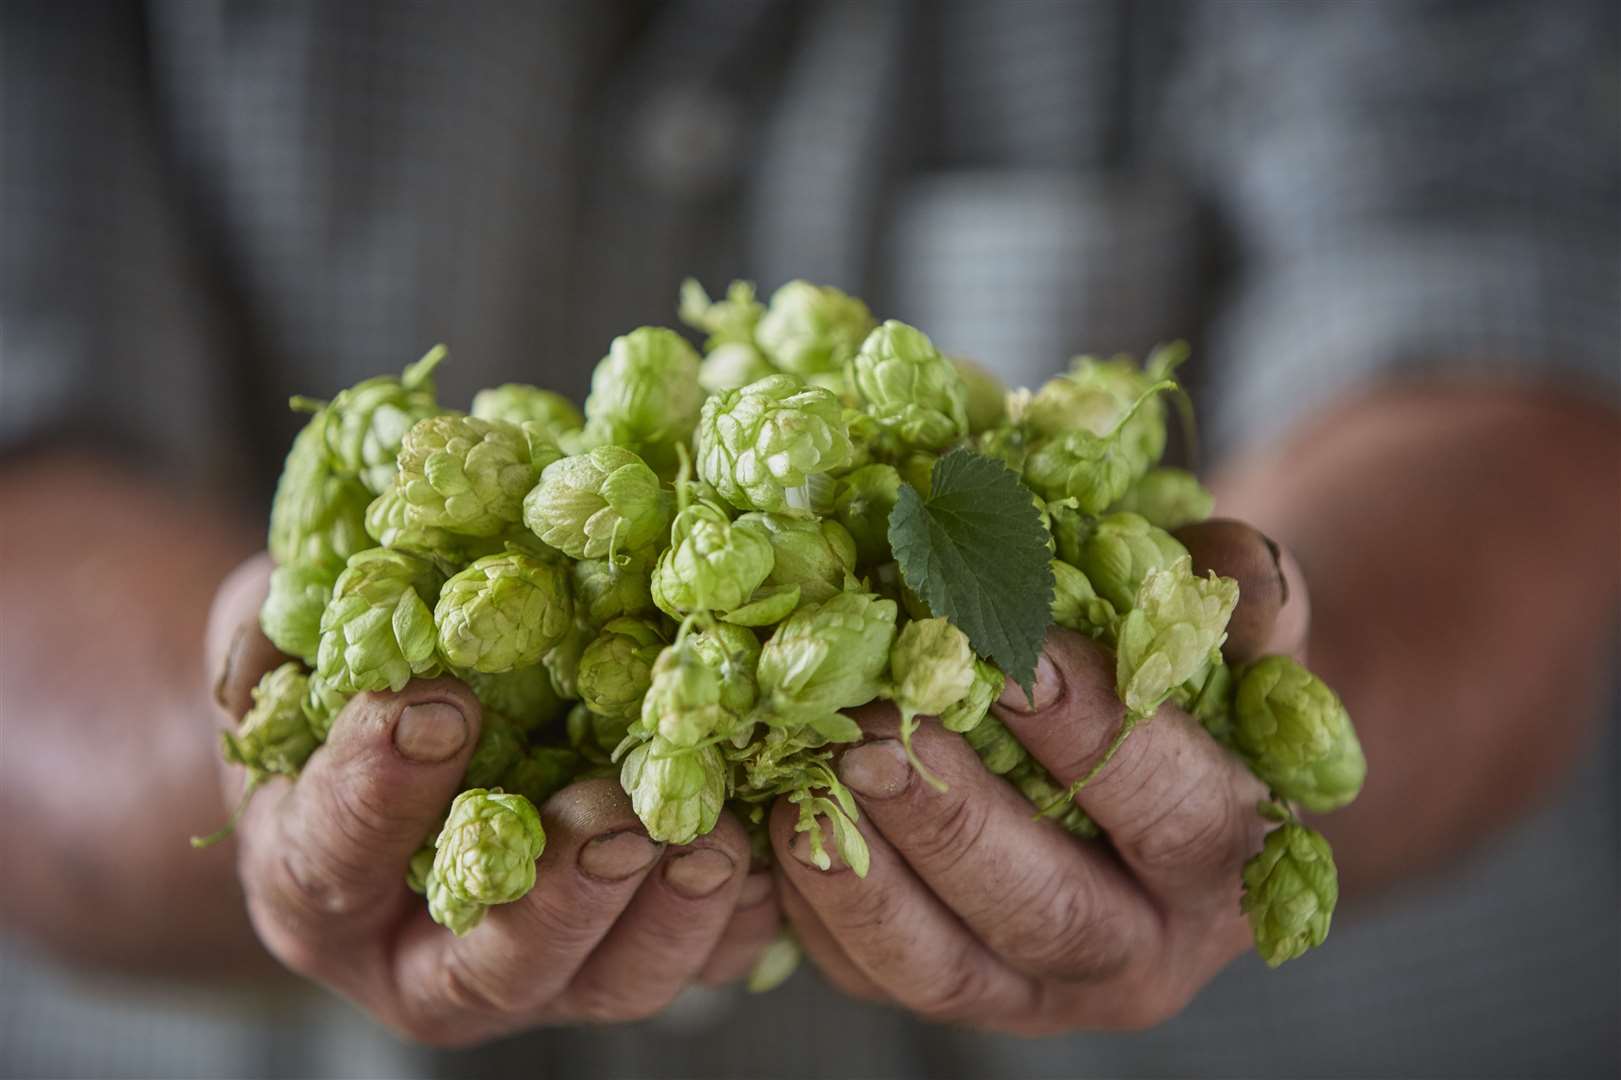 Hops need to be fresh for green hop beer